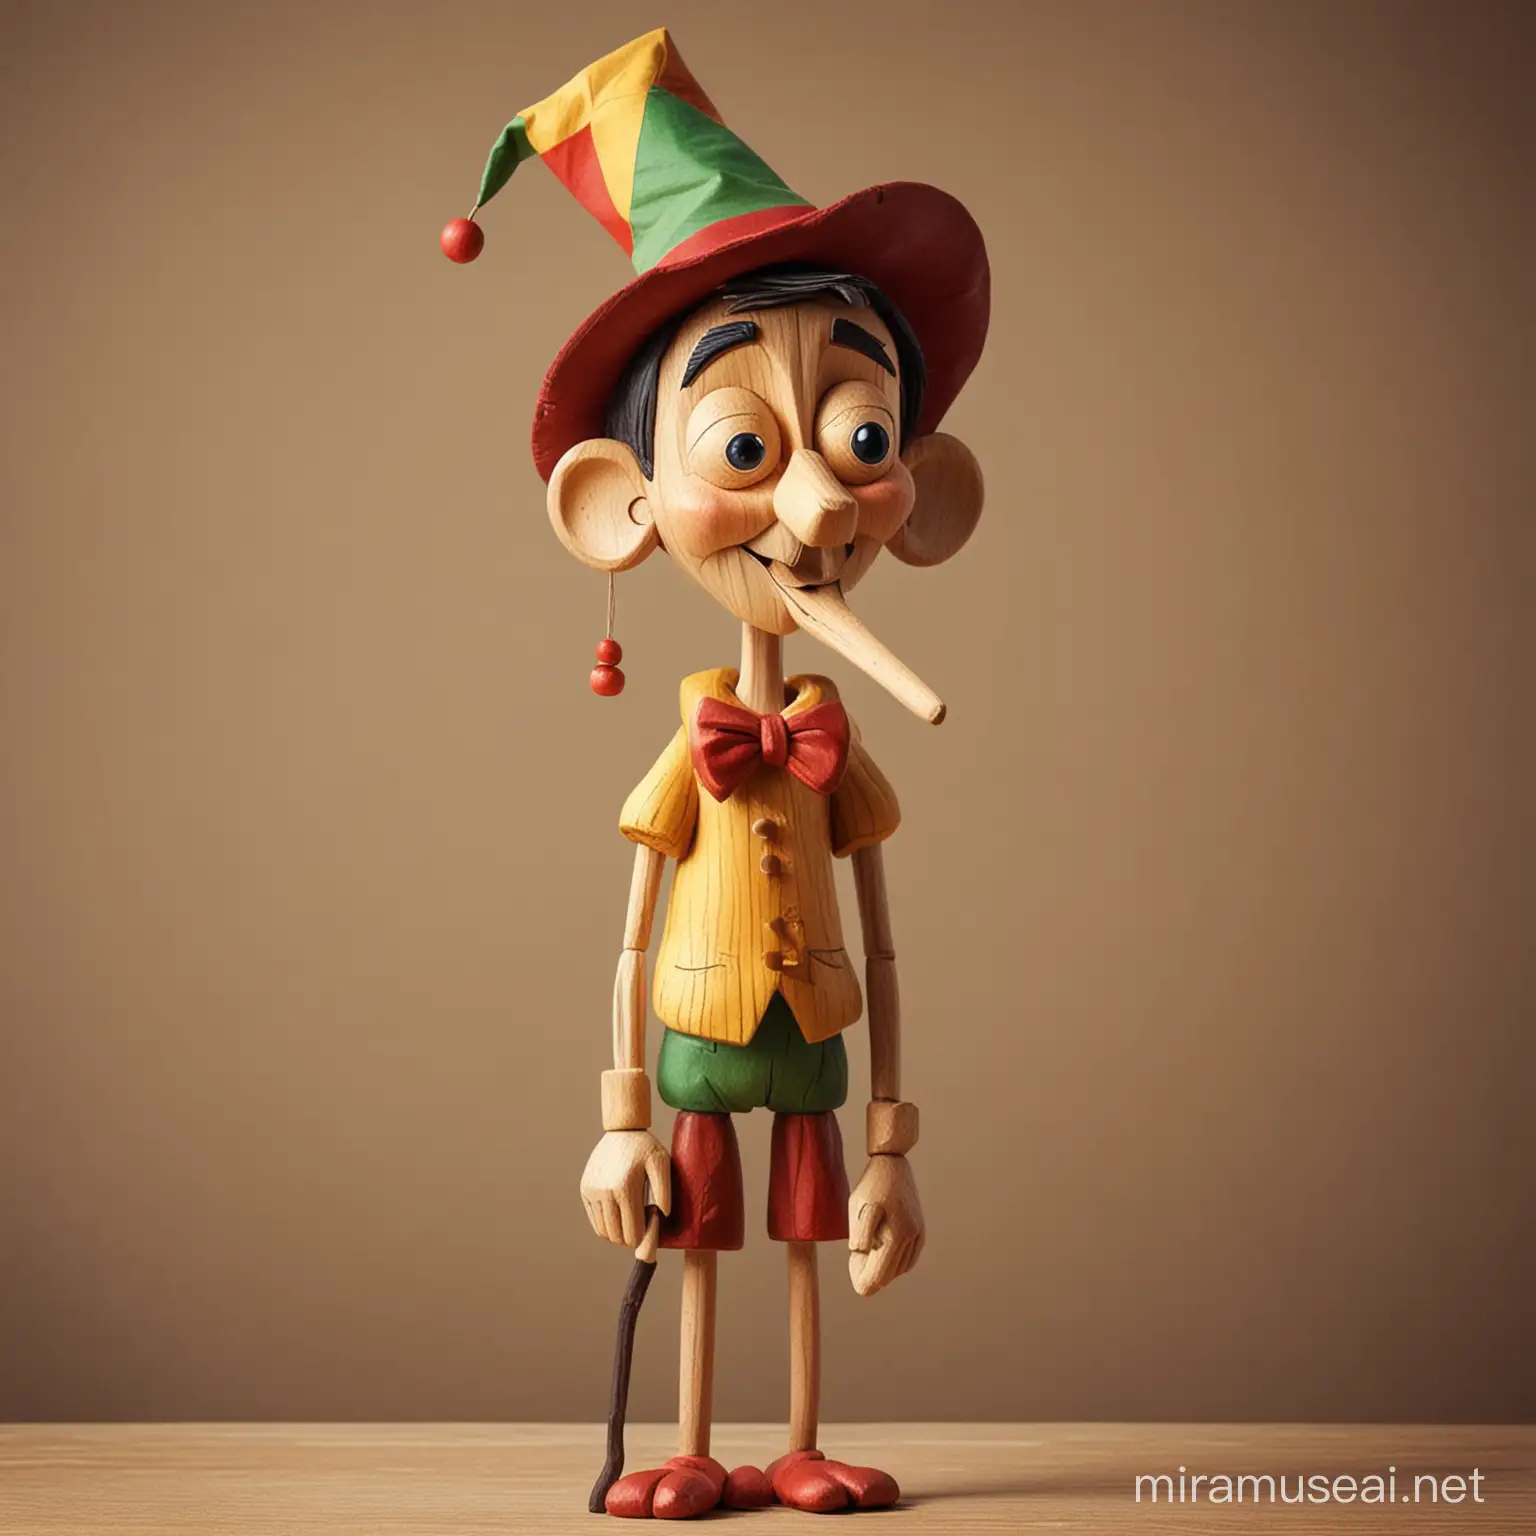 Pinocchio Wooden Puppet Art LongNosed Character in Whimsical Illustrative Style